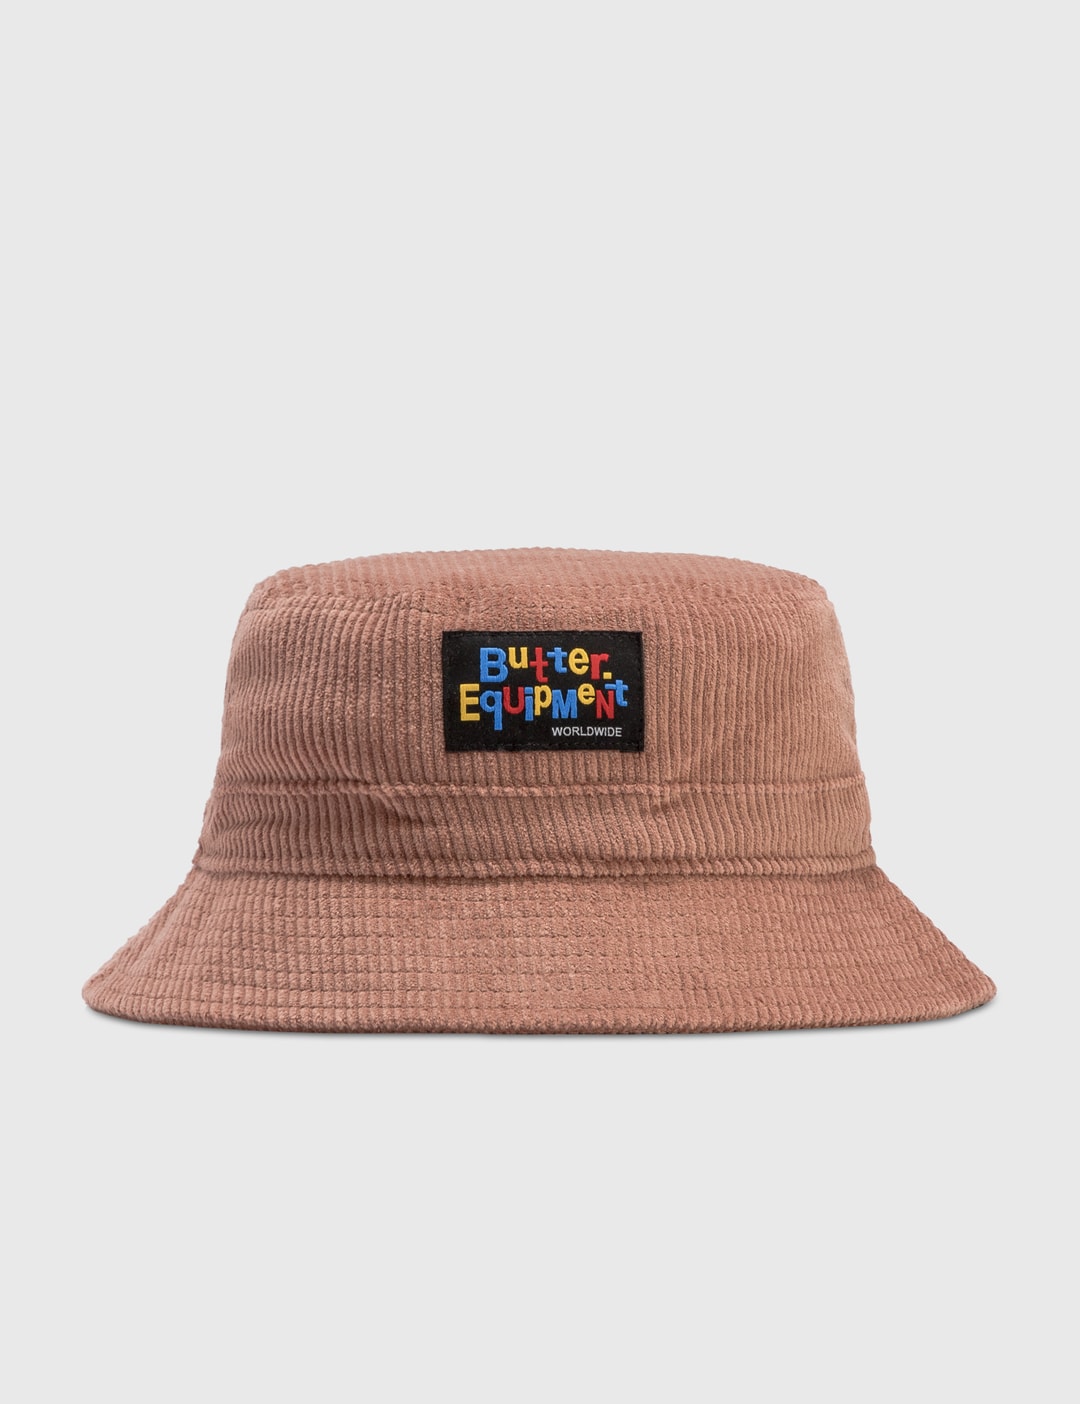 Butter Goods - High Wale Corduroy Bucket Hat | HBX - Globally Curated ...